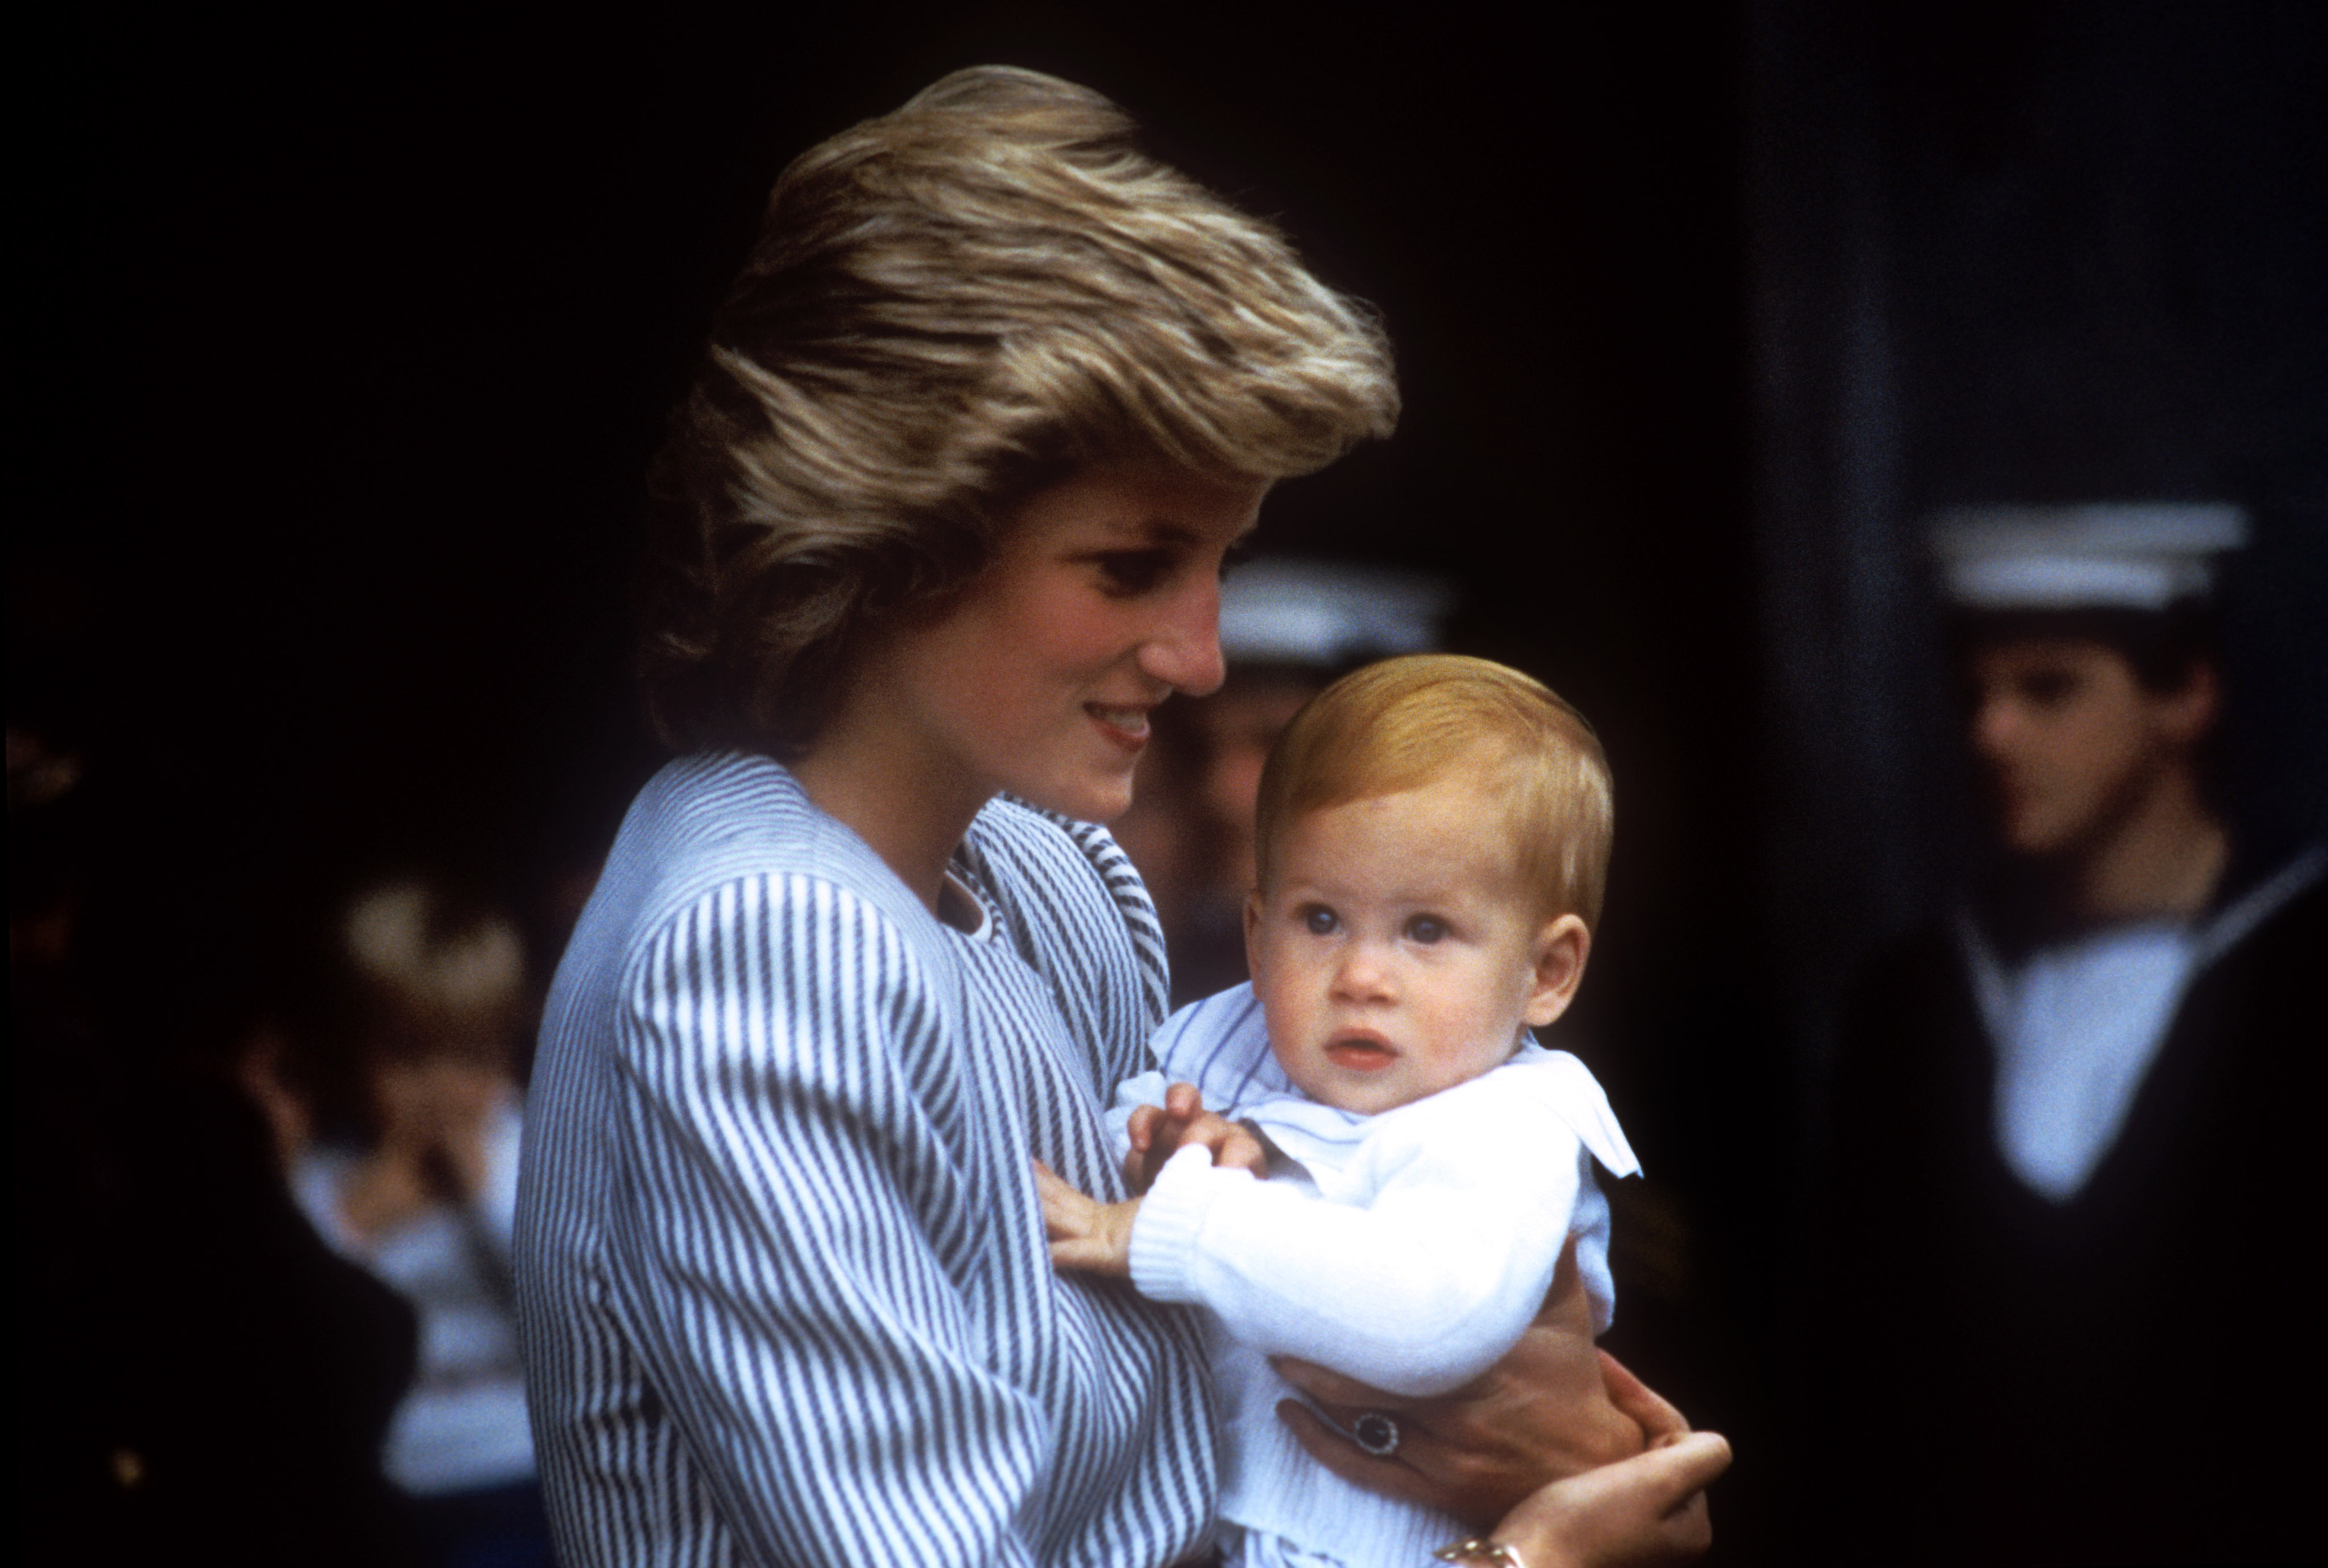 Baby Harry with his mother, Diana, the Princess of Wales, whose life would be tragically cut short in a car accident in Paris in 1997 (PA)